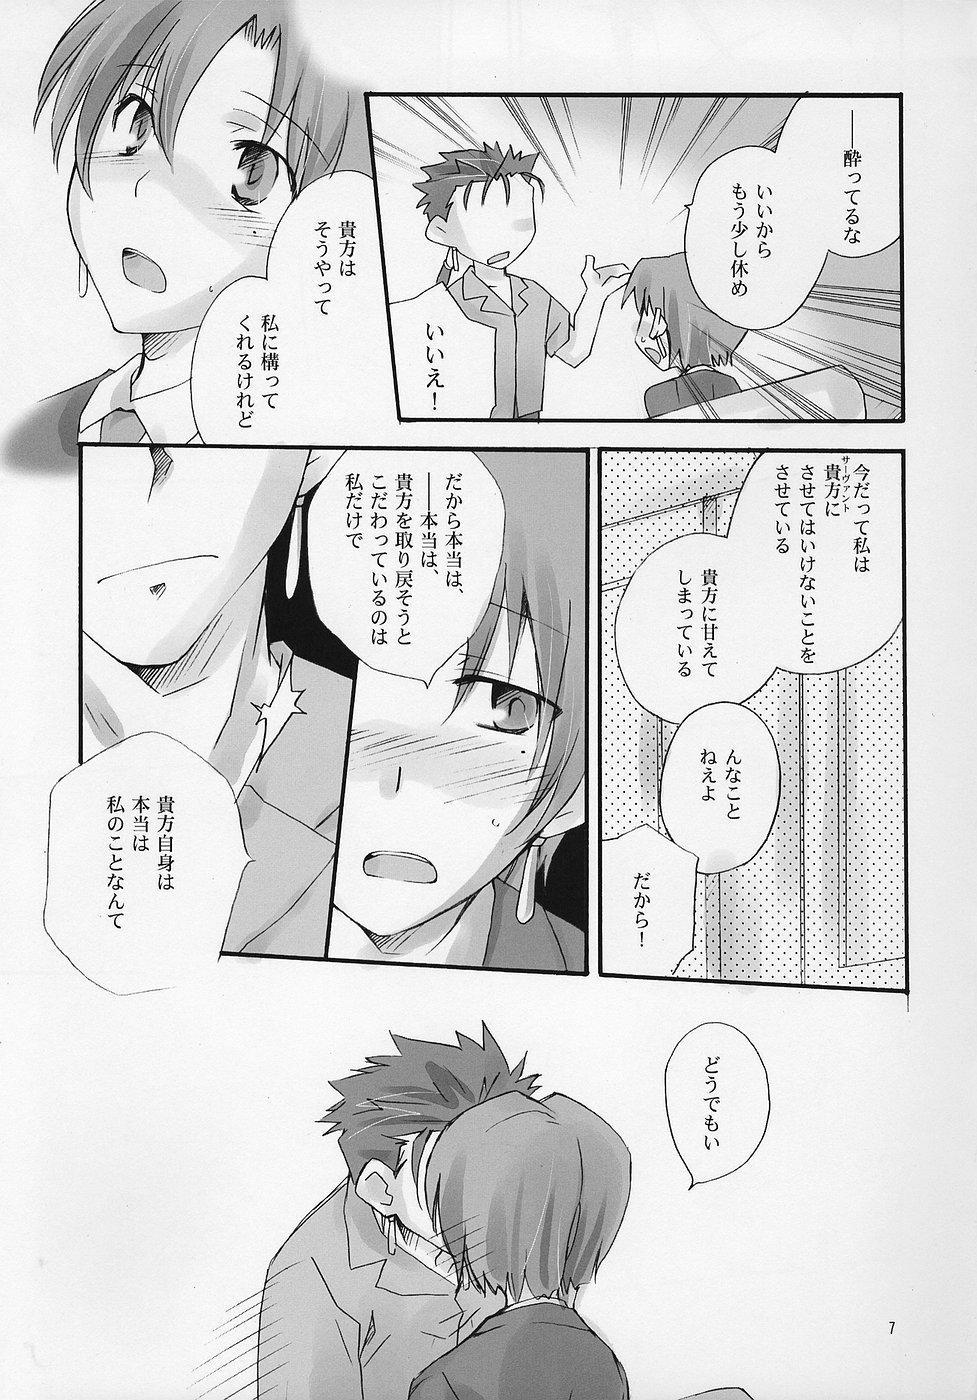 Lady Honeywhip - Fate hollow ataraxia Reverse - Page 6